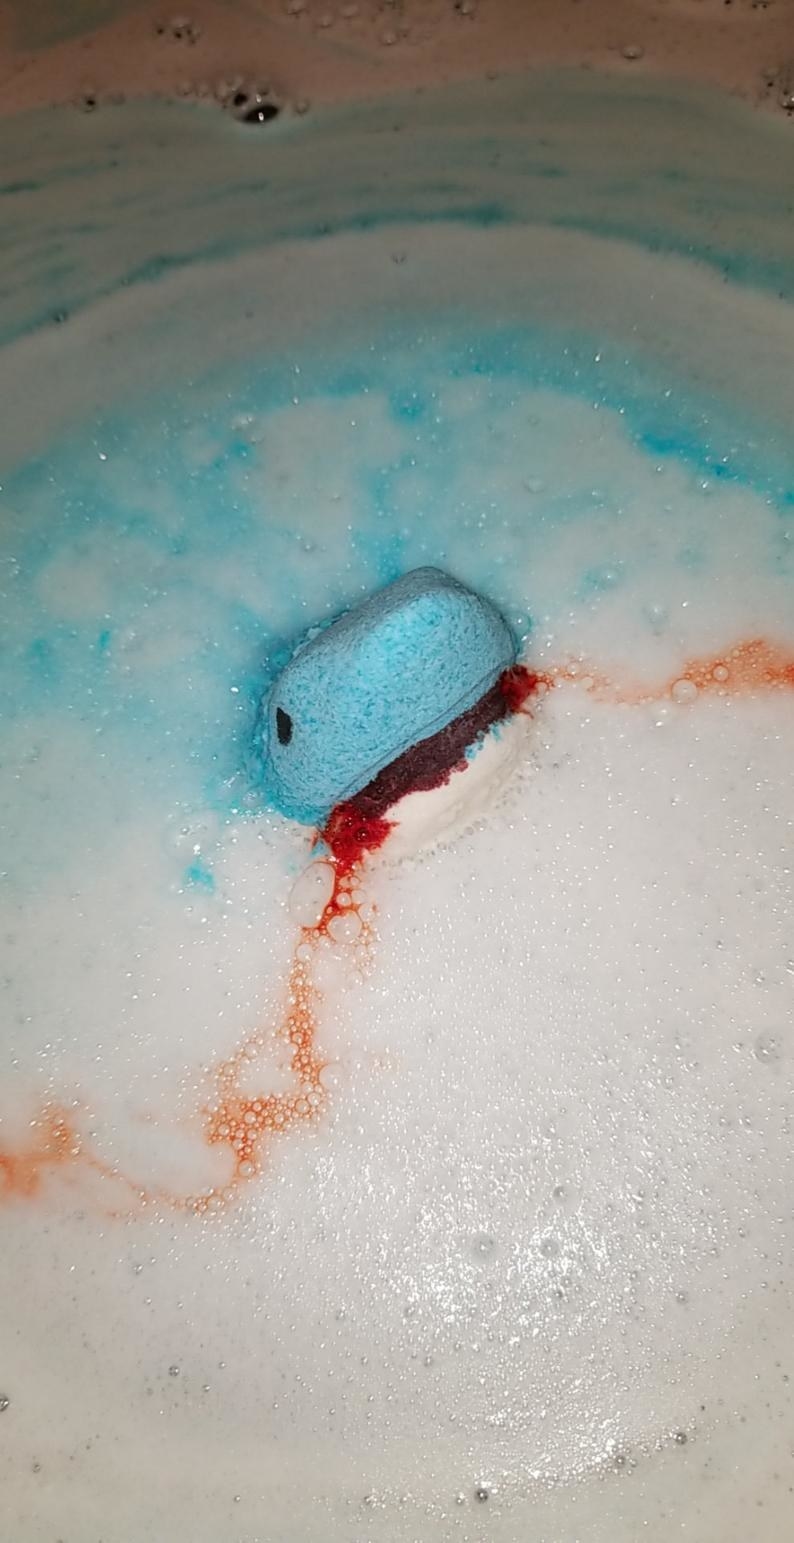 shark head bath bomb with red liquid coming from its sudsy mouth